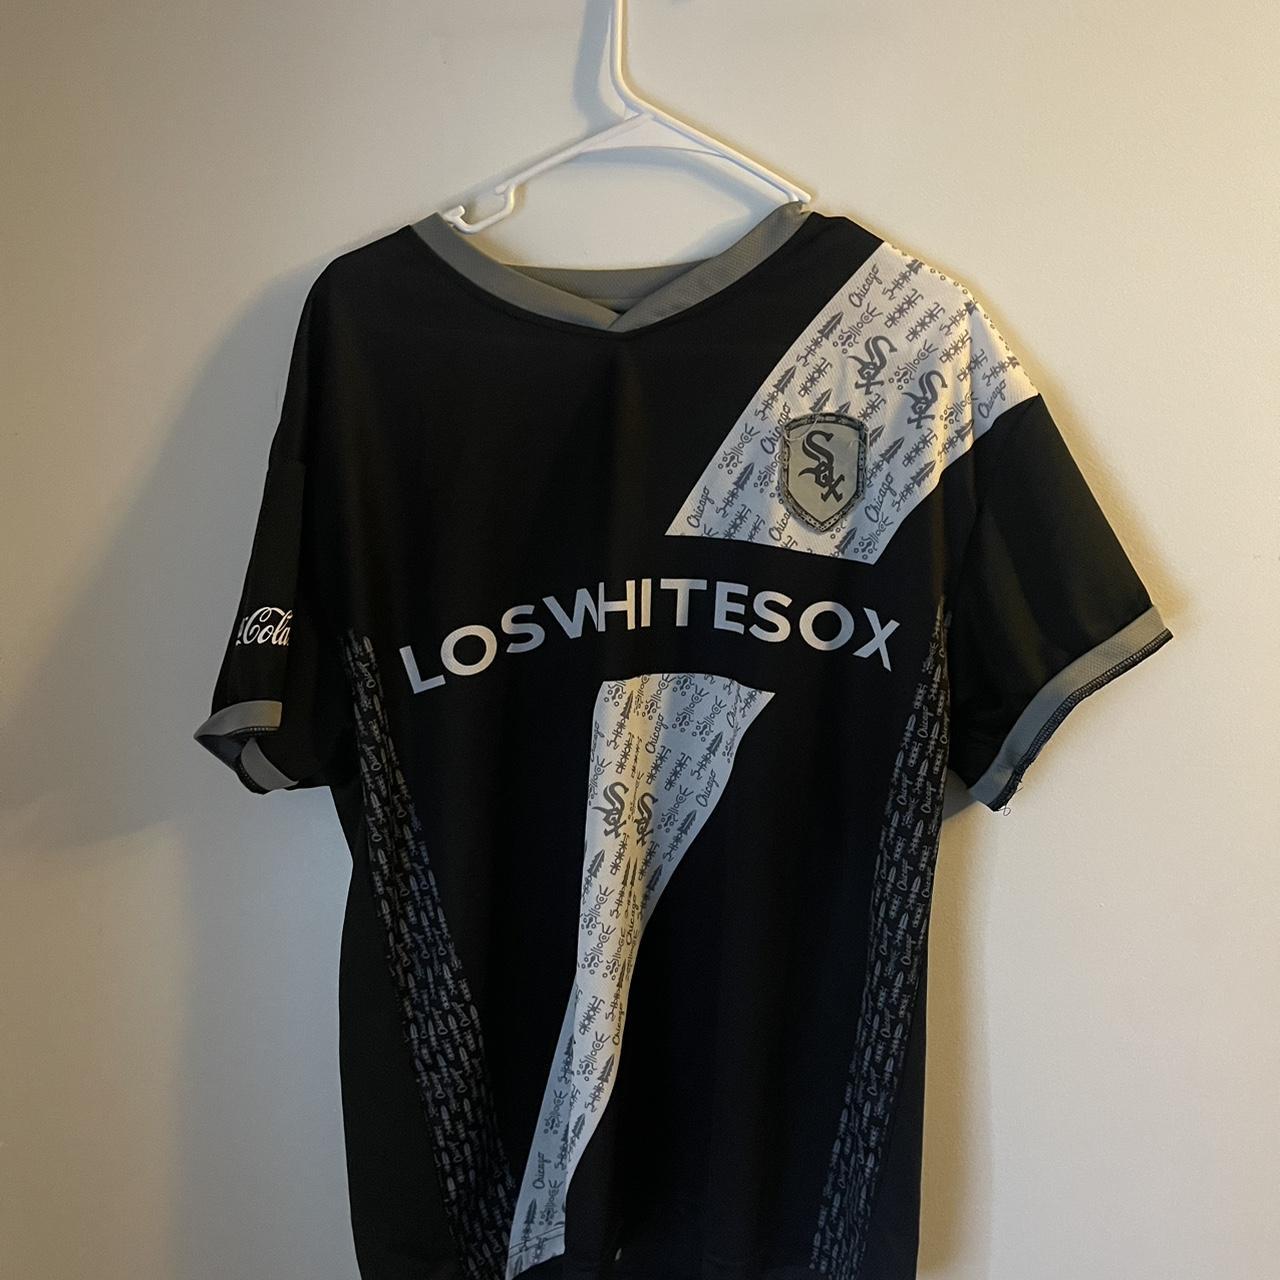 Chicago White Sox “los white sox” soccer jersey size - Depop